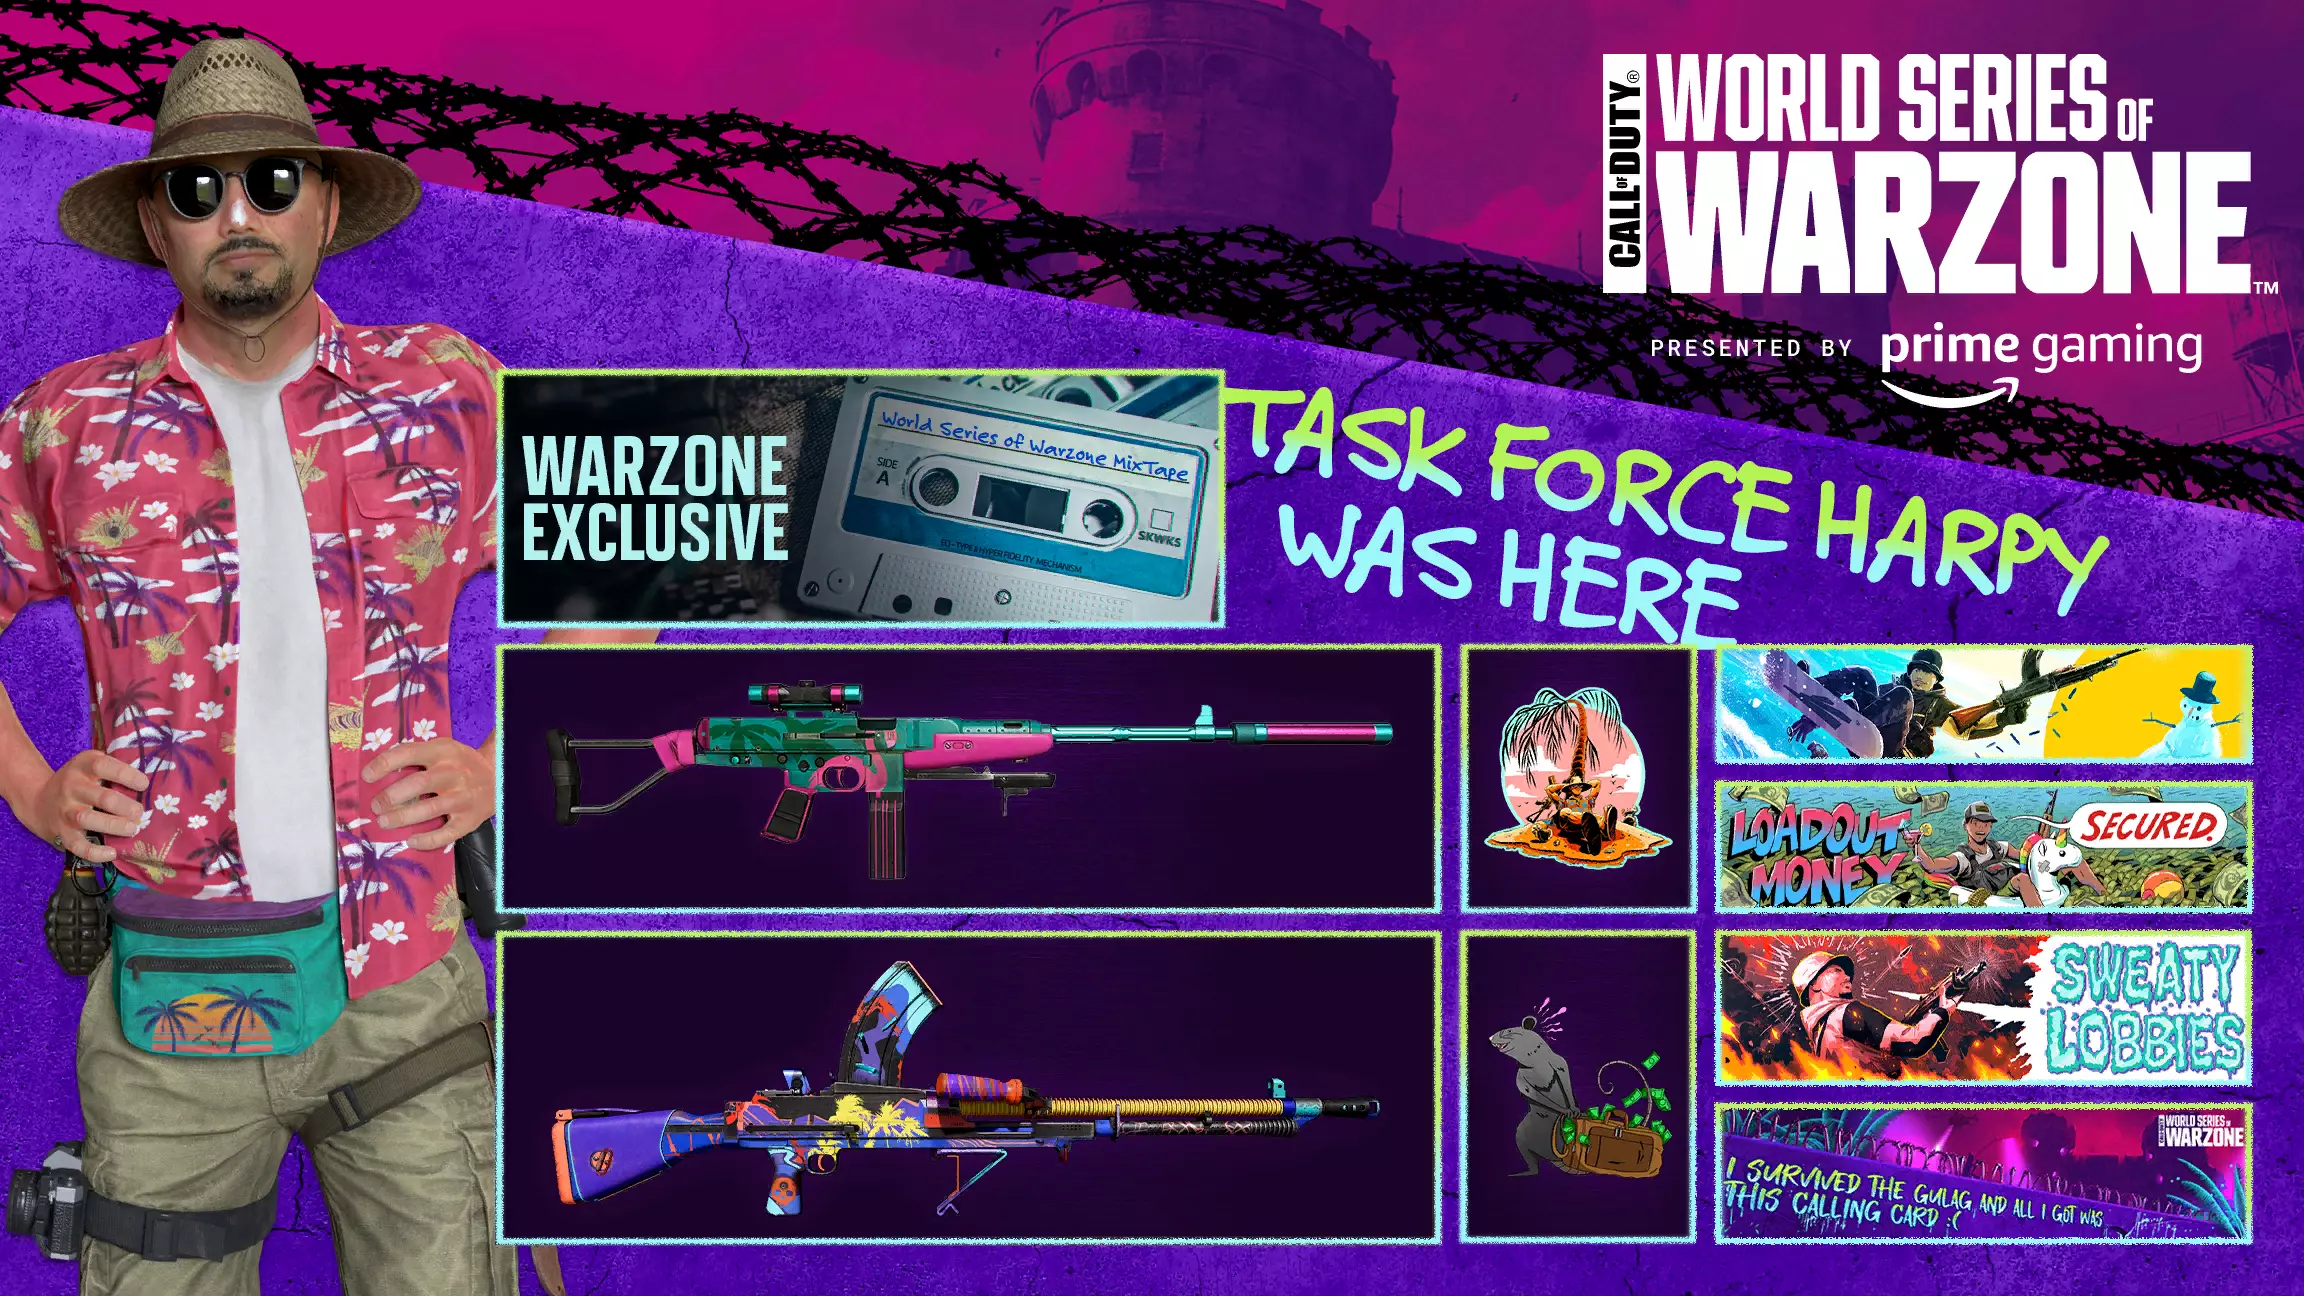 WZM Leakers On Duty on X:  Prime Free Bundle World Series of Warzone  Rat Pack Claim here -  #WarzoneMobile #Warzone #wzm   / X